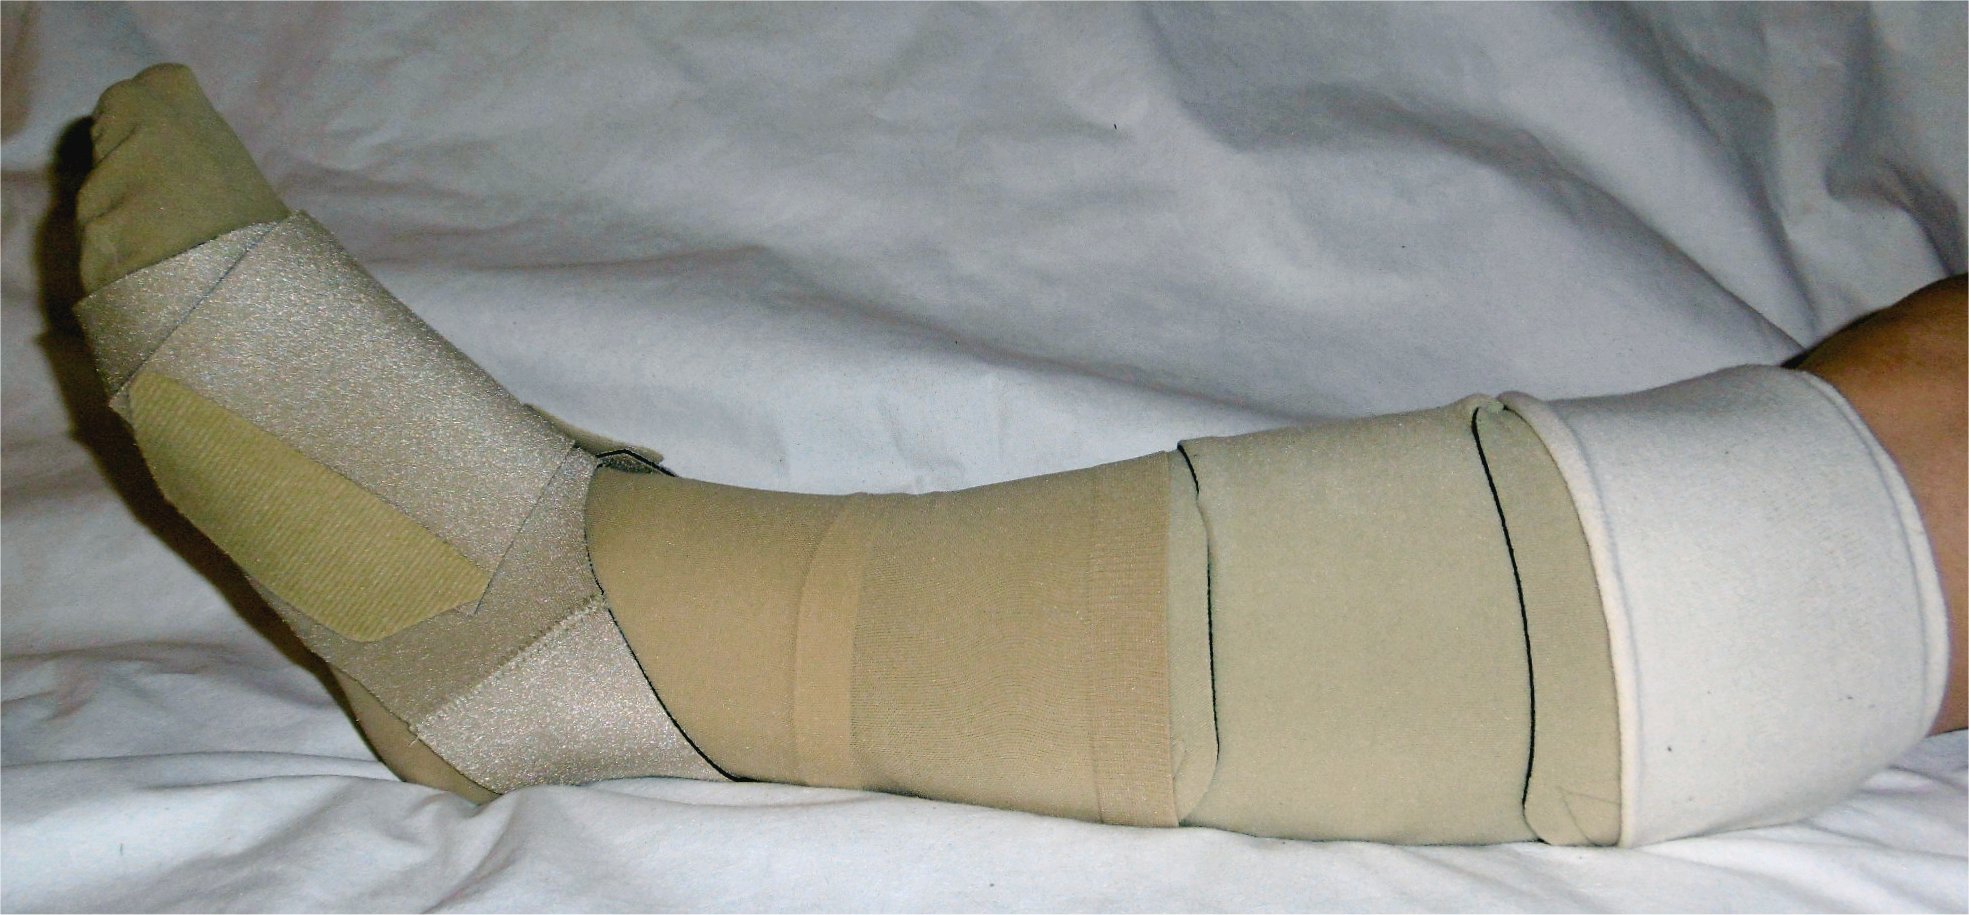 Compression therapy for lymphedema